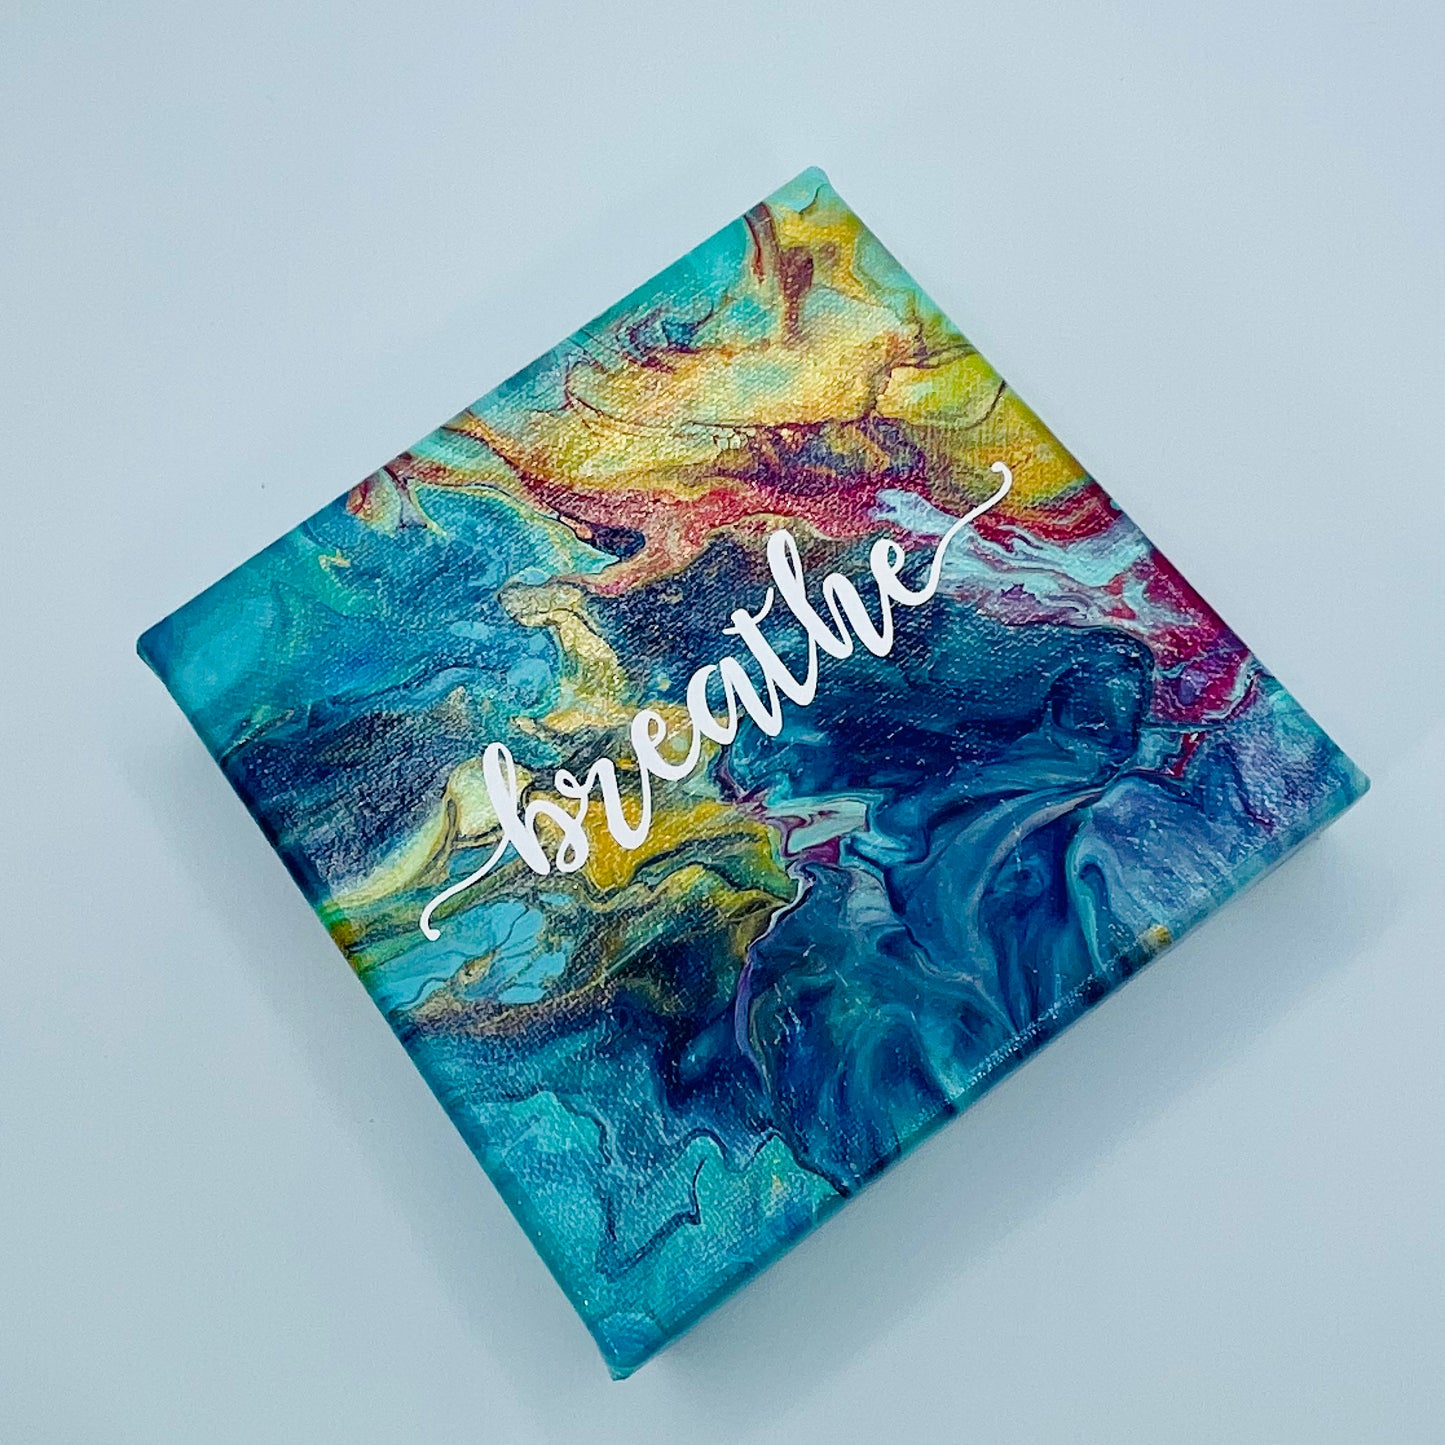 The Mudra Breathe Block. A colorful hand painted painting that says 'breathe'